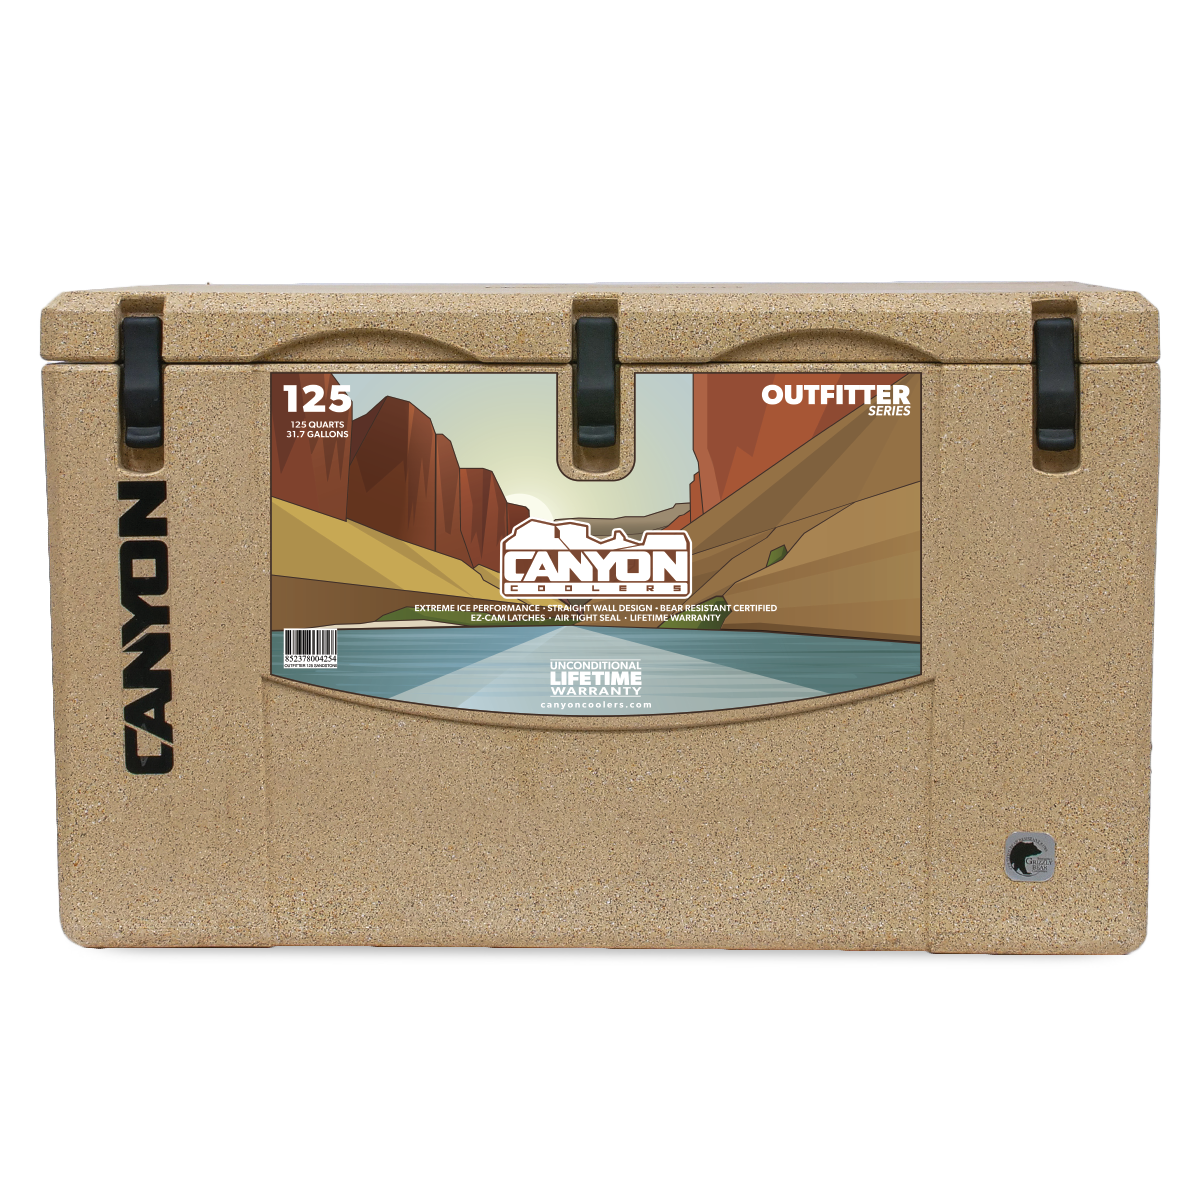 The Canyon Outfitter Series Coolers are shown on a white background.